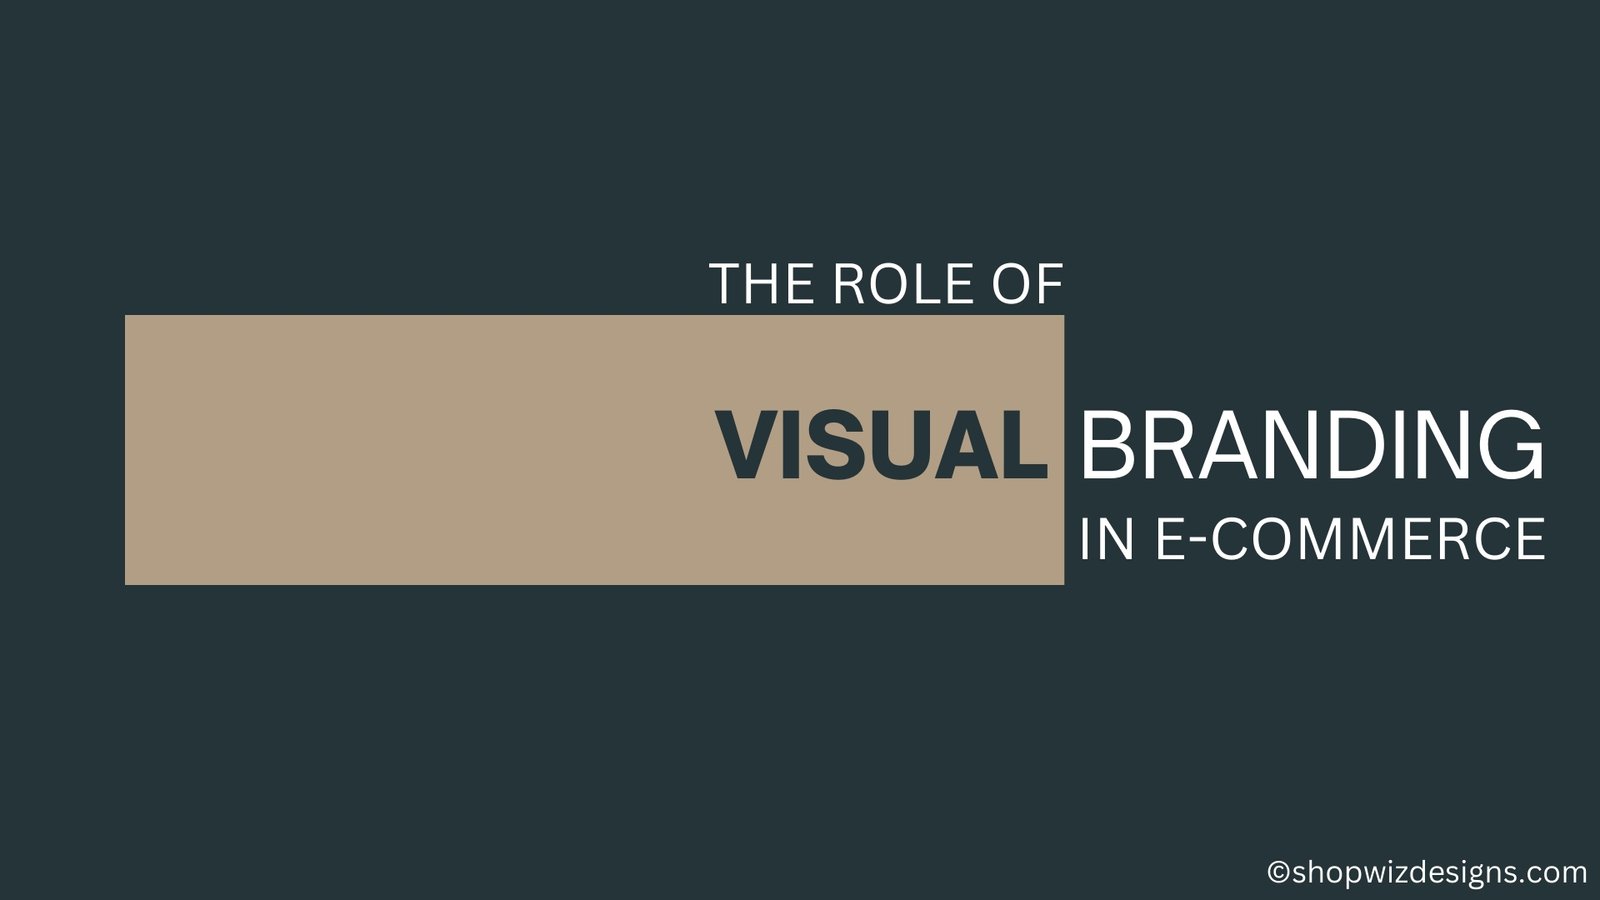 The Role of Visual Branding in E-Commerce